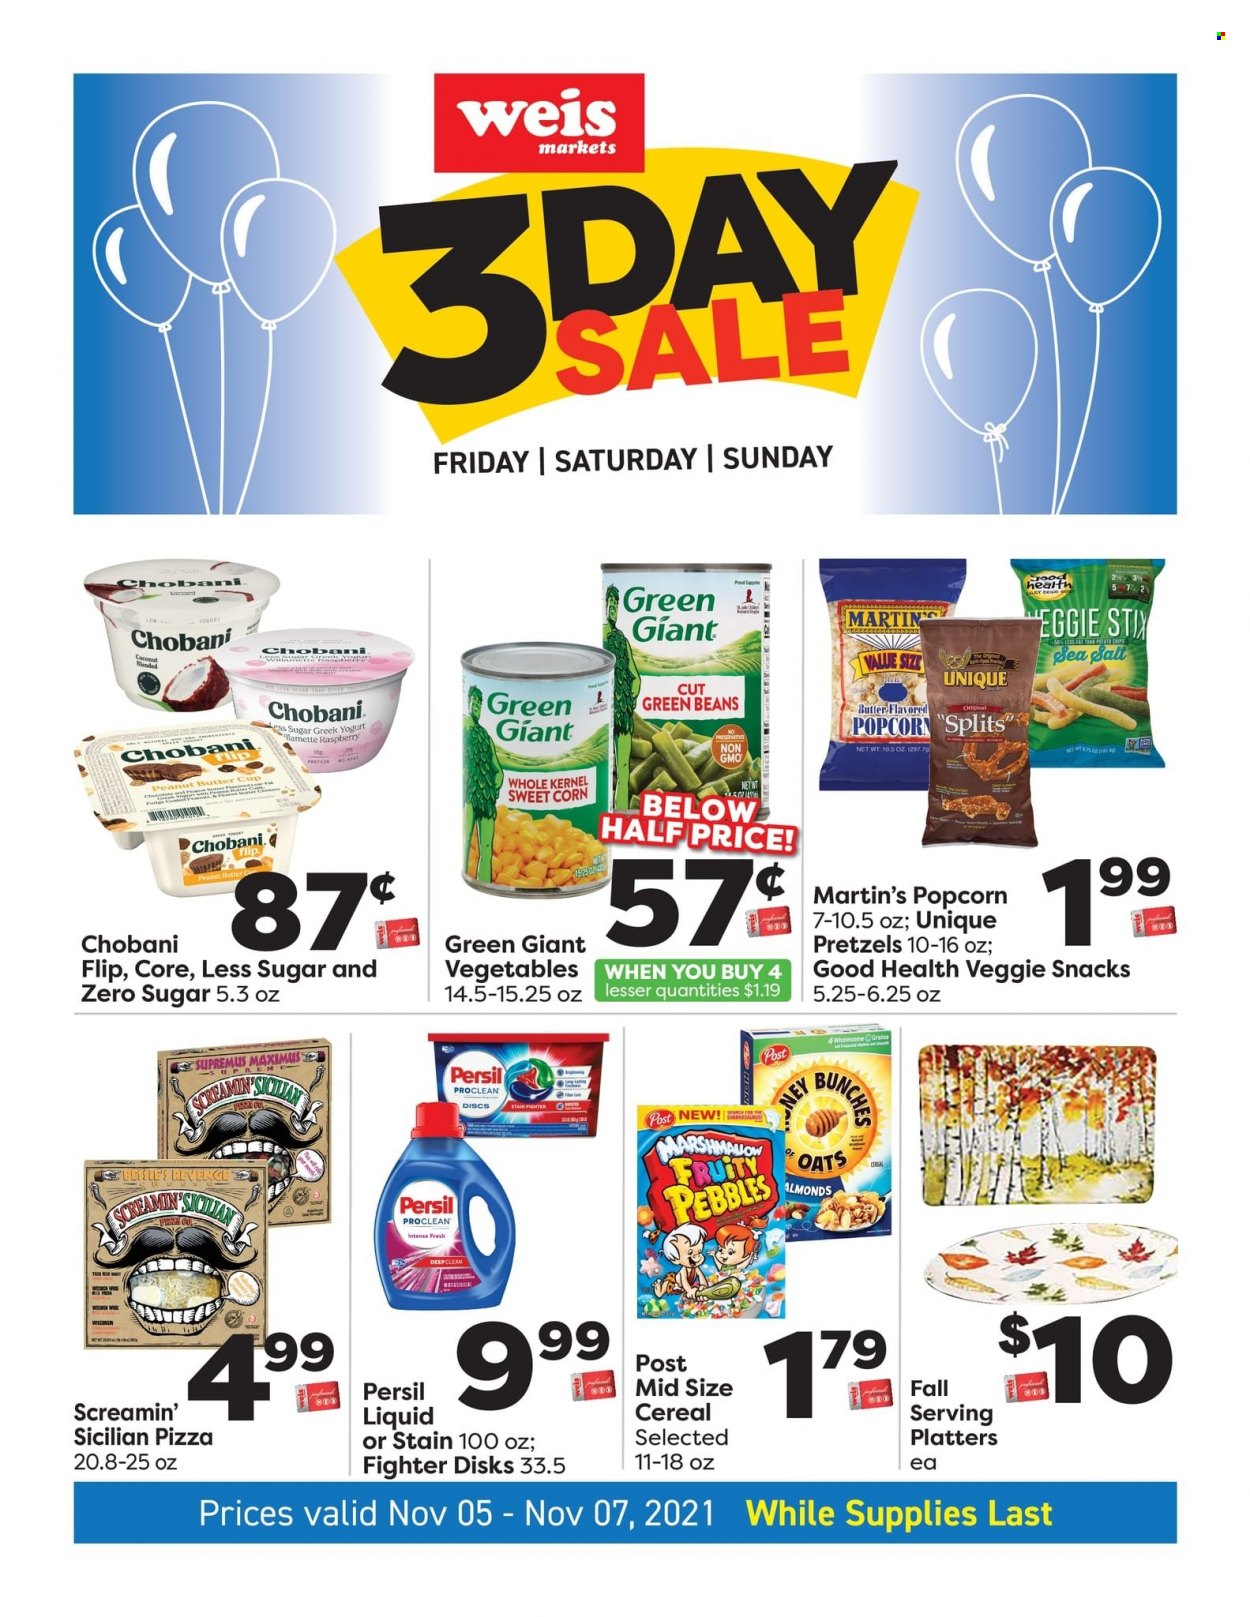 thumbnail - Weis Flyer - 11/05/2021 - 11/07/2021 - Sales products - pretzels, beans, corn, green beans, sweet corn, coconut, pizza, greek yoghurt, yoghurt, Chobani, butter, Screamin' Sicilian, snack, chips, popcorn, oats, cereals, Fruity Pebbles, Persil, cup, serving platters, bunches. Page 1.